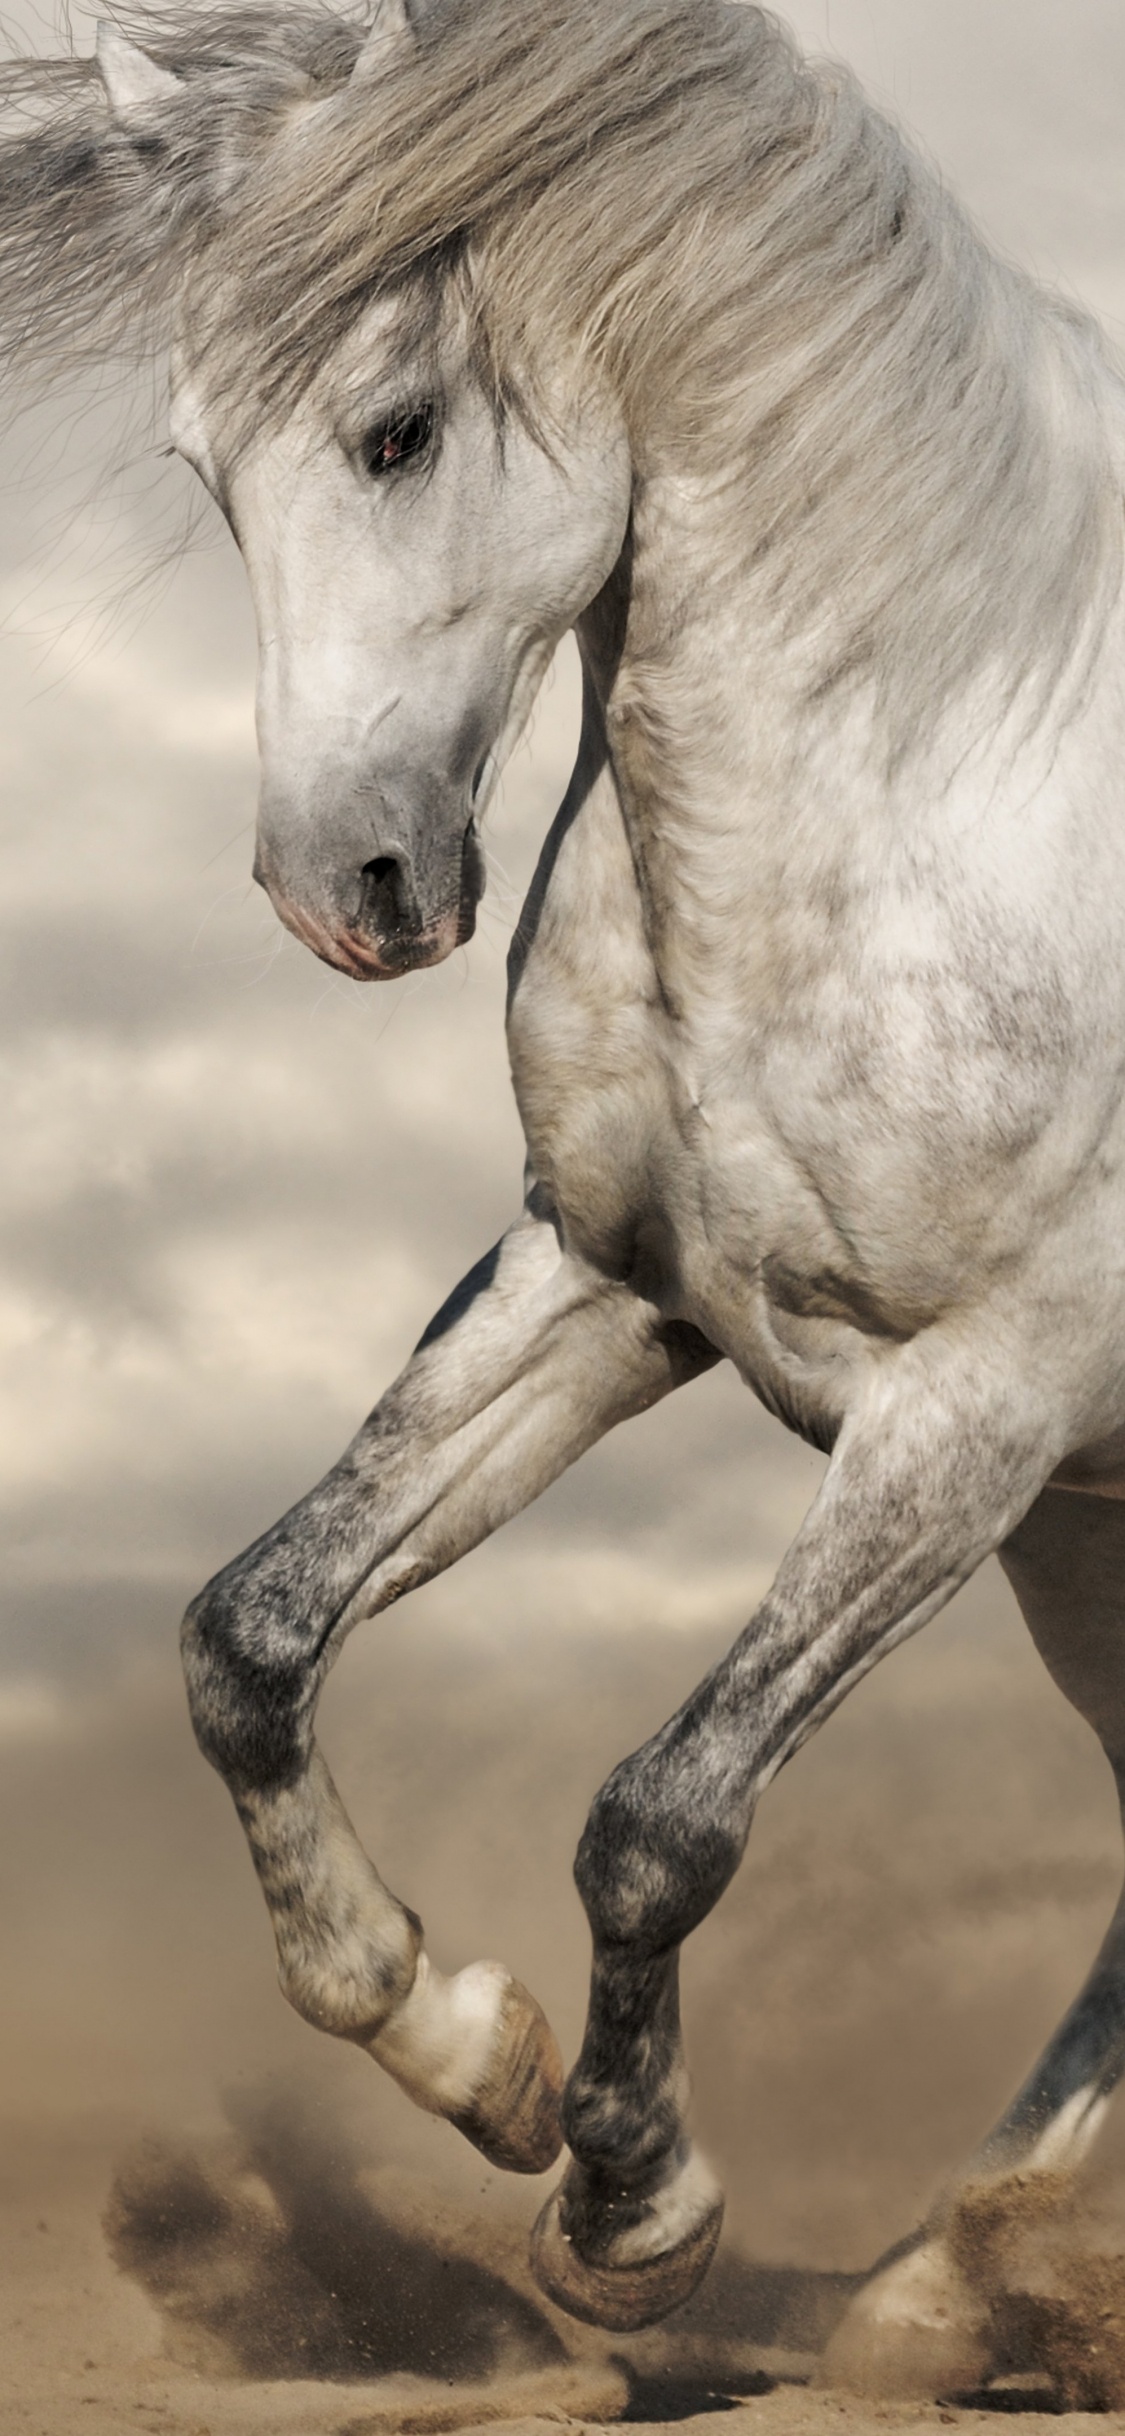 White Horse Running on Brown Sand During Daytime. Wallpaper in 1125x2436 Resolution